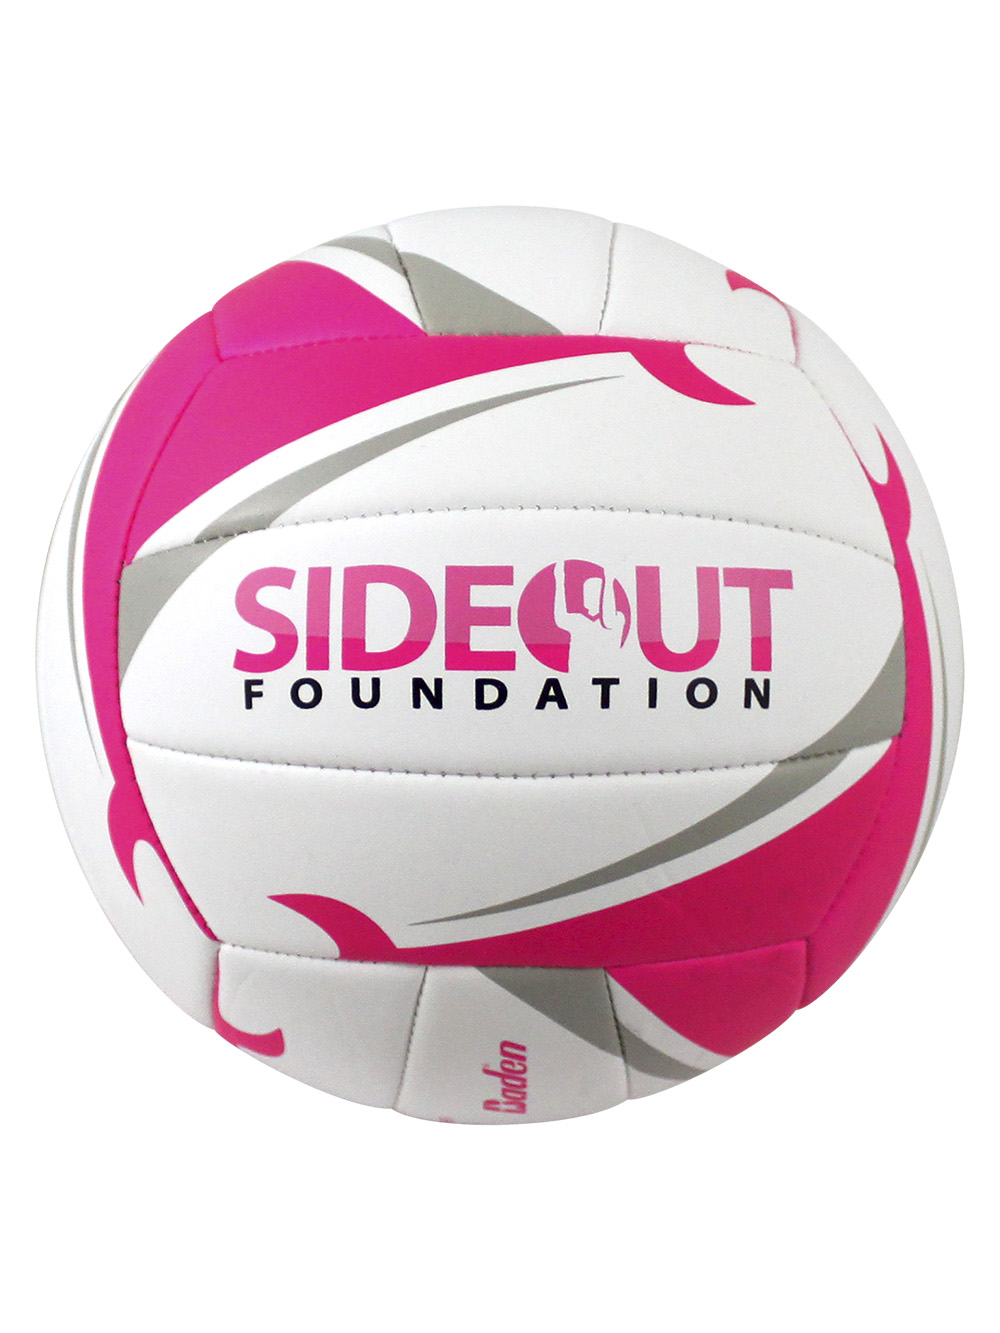 NEW Baden Breast Cancer VB | Midwest Volleyball Warehouse